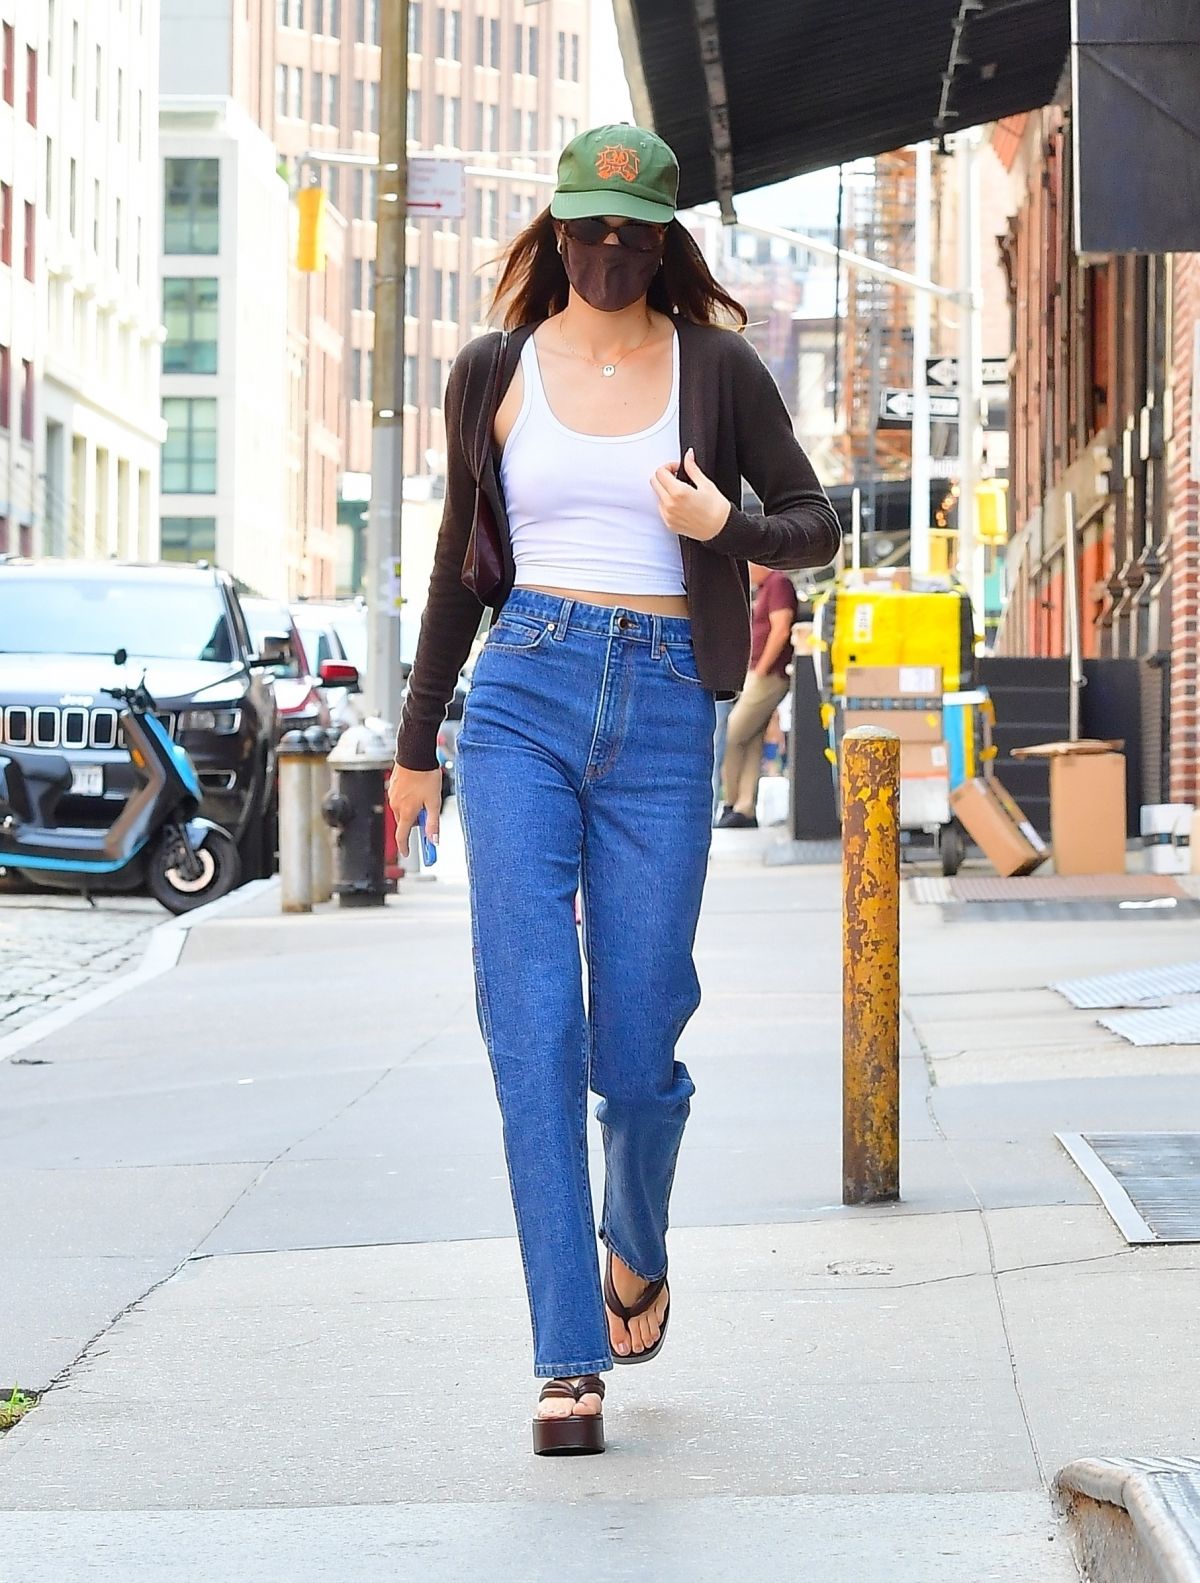 KENDALL JENNER Out in Denim Out Lunch in New York 09/12/2021 – HawtCelebs